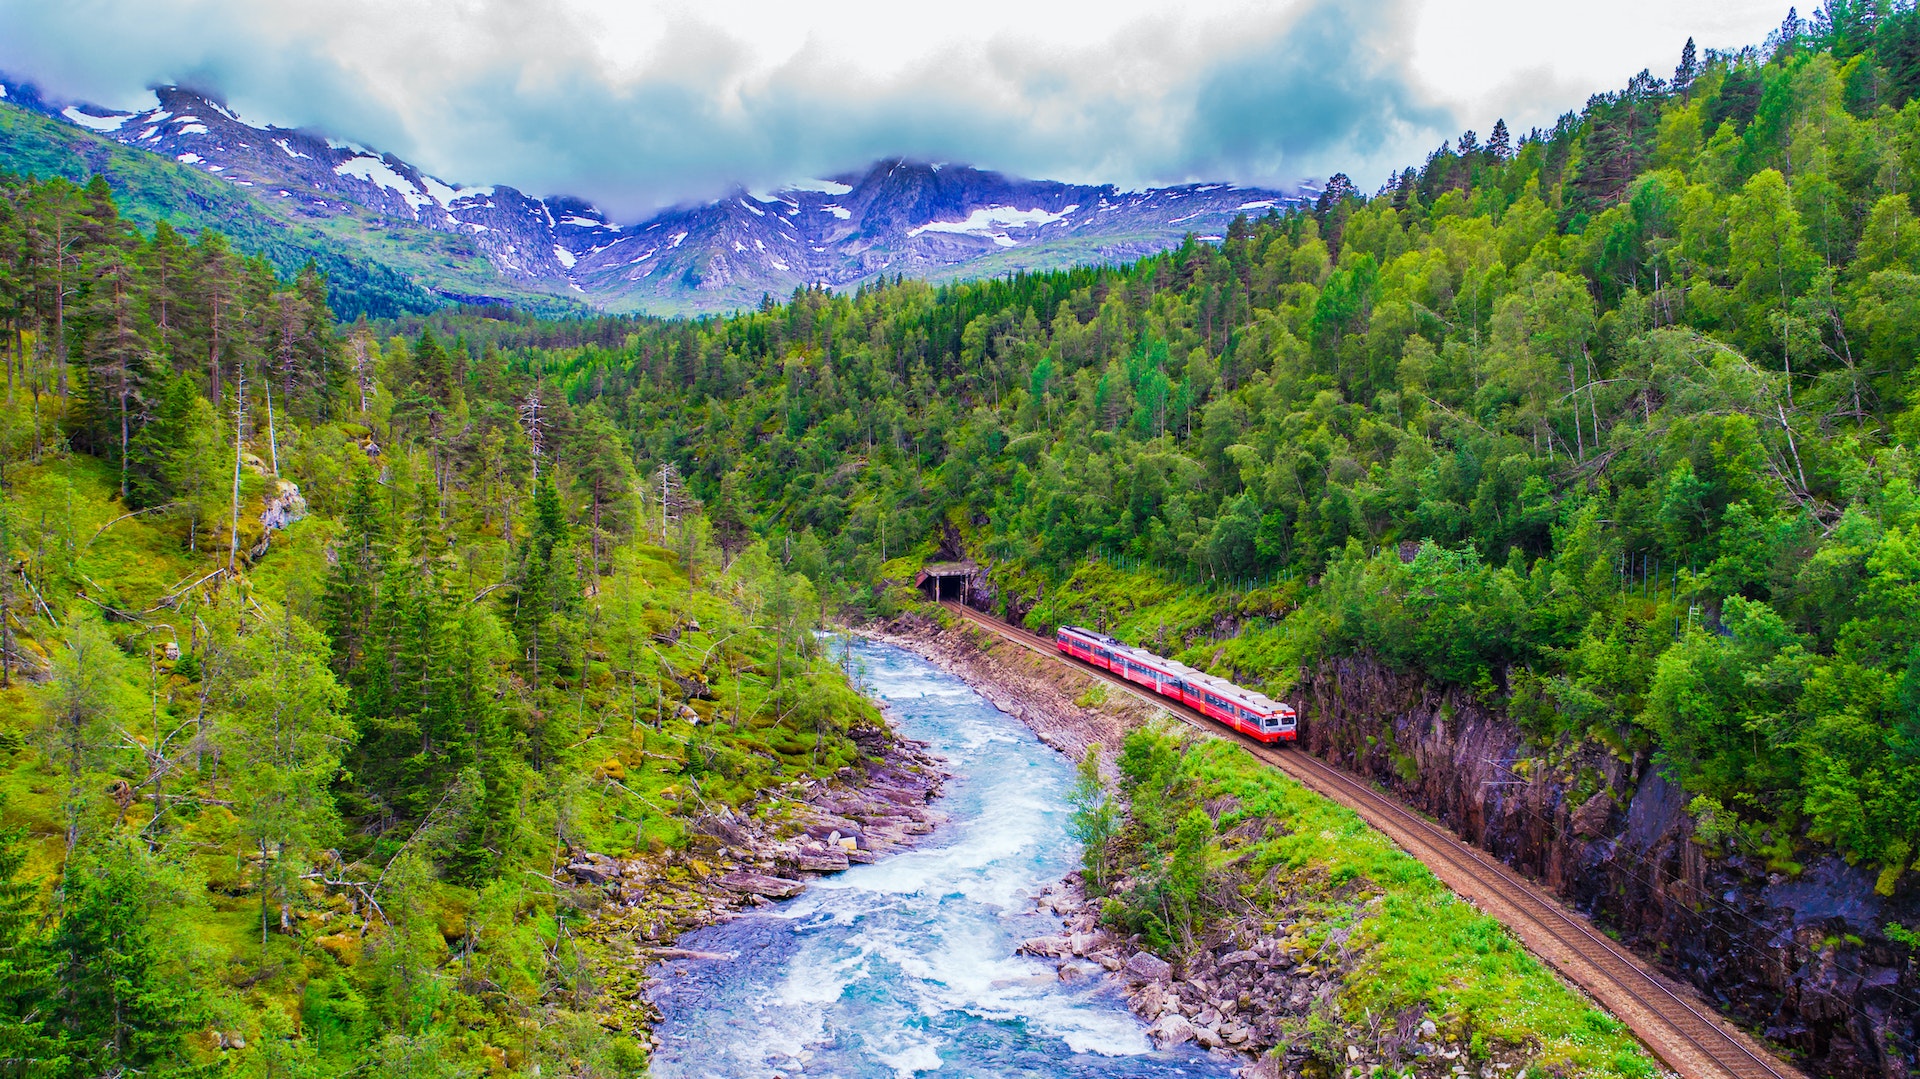 Train traveling on the Bergen Railway, alongside a river surrounded by dense forest